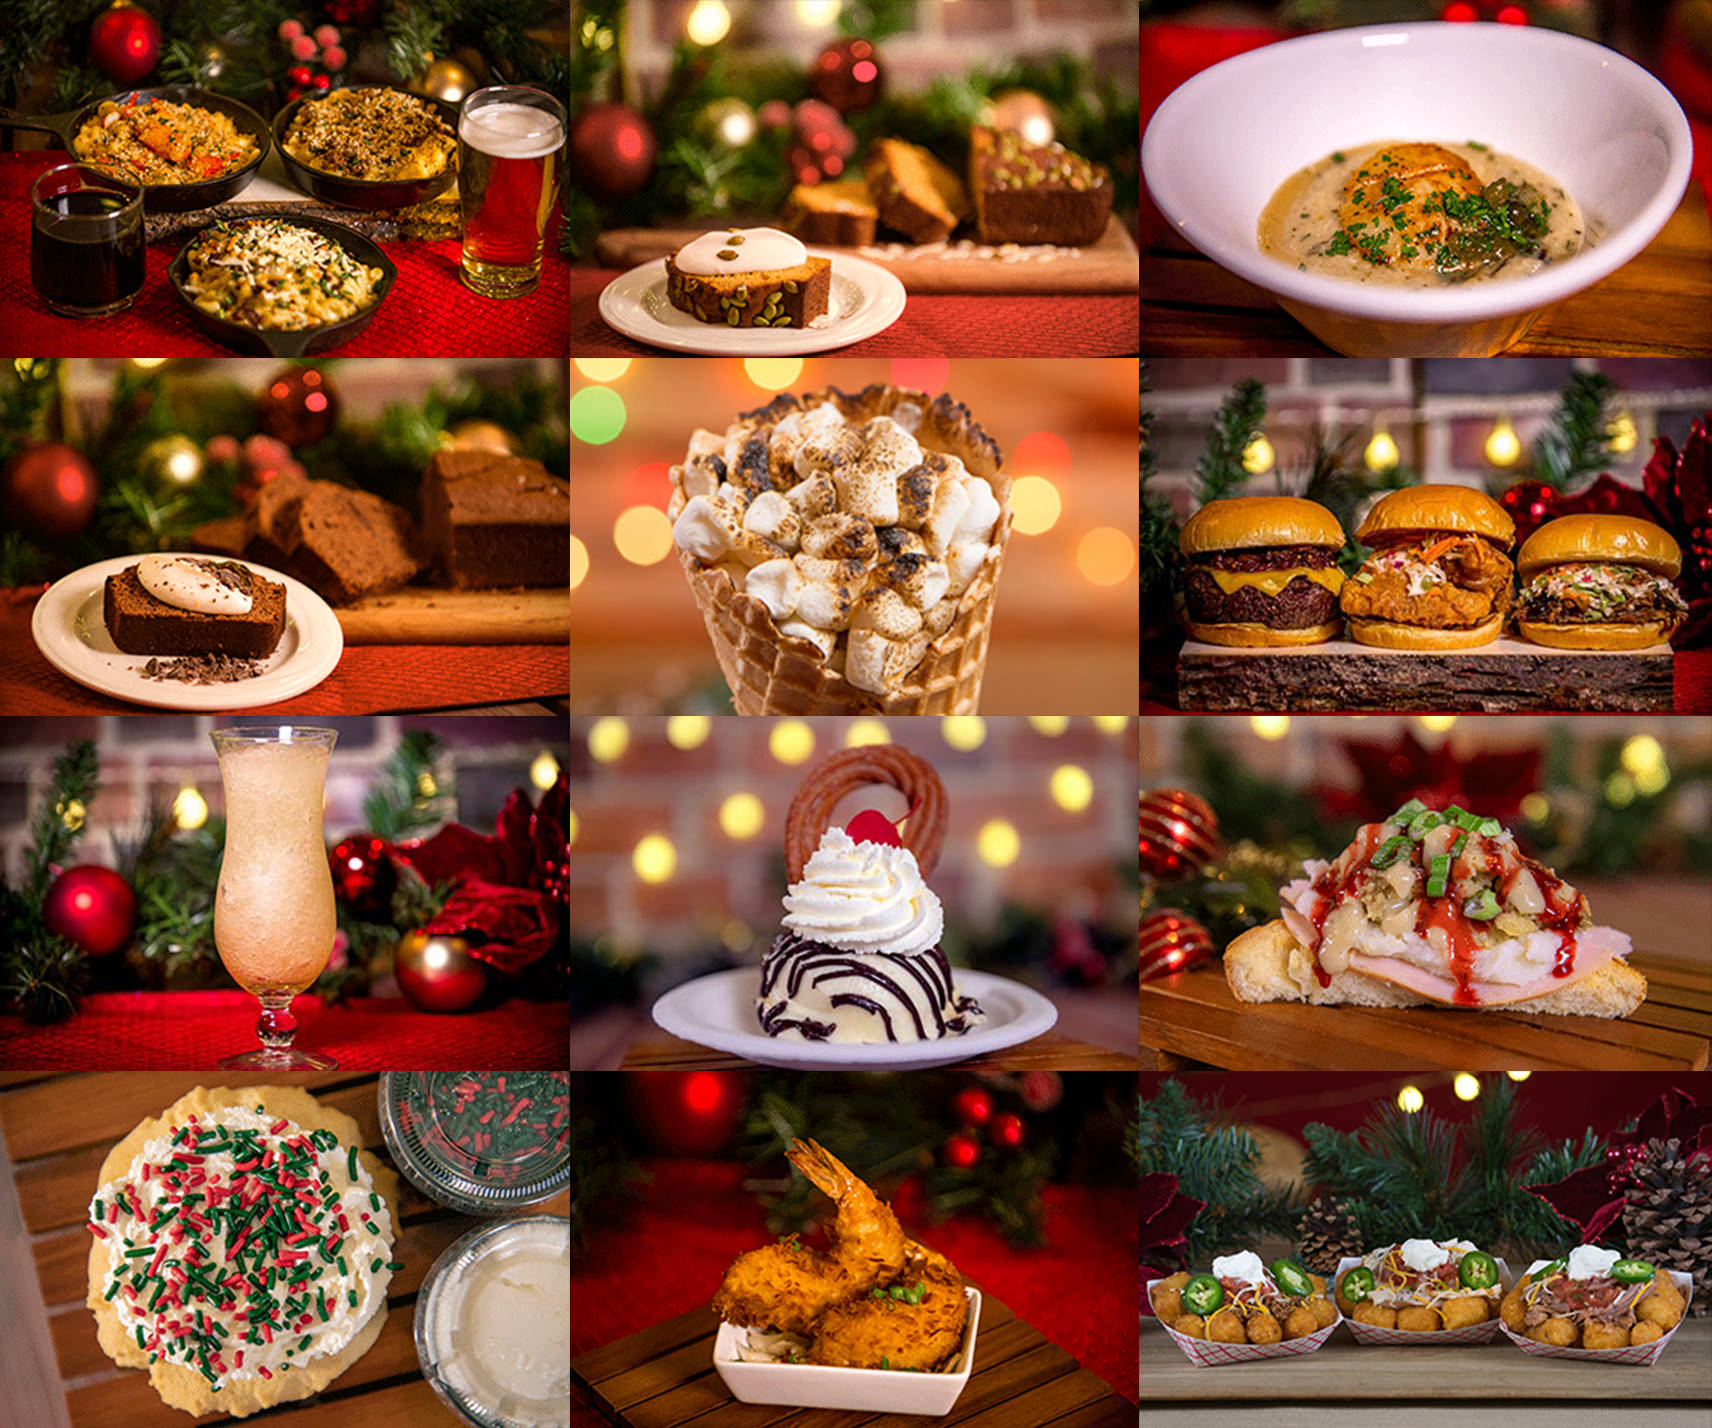 Food & Beverage Items for the 2020 Christmas Celebration at SeaWorld, Orlando (Text List)